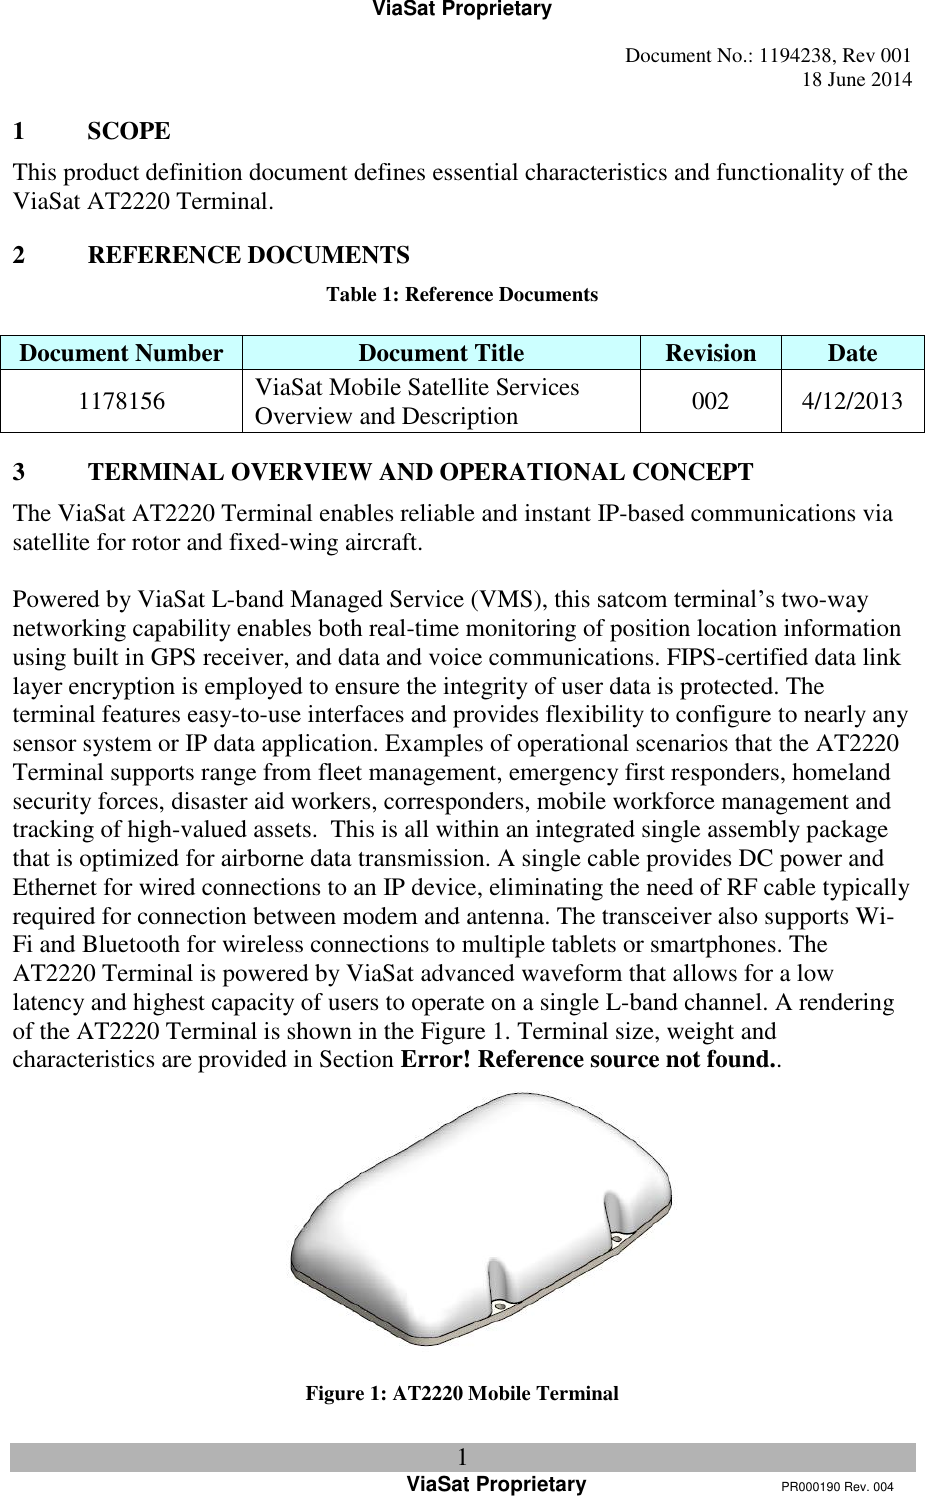 ViaSat Proprietary   Document No.: 1194238, Rev 001  18 June 2014 1 ViaSat Proprietary      PR000190 Rev. 004 1 SCOPE This product definition document defines essential characteristics and functionality of the ViaSat AT2220 Terminal. 2 REFERENCE DOCUMENTS Table 1: Reference Documents  Document Number Document Title Revision Date 1178156 ViaSat Mobile Satellite Services Overview and Description 002 4/12/2013 3 TERMINAL OVERVIEW AND OPERATIONAL CONCEPT The ViaSat AT2220 Terminal enables reliable and instant IP-based communications via satellite for rotor and fixed-wing aircraft.   Powered by ViaSat L-band Managed Service (VMS), this satcom terminal’s two-way networking capability enables both real-time monitoring of position location information using built in GPS receiver, and data and voice communications. FIPS-certified data link layer encryption is employed to ensure the integrity of user data is protected. The terminal features easy-to-use interfaces and provides flexibility to configure to nearly any sensor system or IP data application. Examples of operational scenarios that the AT2220 Terminal supports range from fleet management, emergency first responders, homeland security forces, disaster aid workers, corresponders, mobile workforce management and tracking of high-valued assets.  This is all within an integrated single assembly package that is optimized for airborne data transmission. A single cable provides DC power and Ethernet for wired connections to an IP device, eliminating the need of RF cable typically required for connection between modem and antenna. The transceiver also supports Wi-Fi and Bluetooth for wireless connections to multiple tablets or smartphones. The AT2220 Terminal is powered by ViaSat advanced waveform that allows for a low latency and highest capacity of users to operate on a single L-band channel. A rendering of the AT2220 Terminal is shown in the Figure 1. Terminal size, weight and characteristics are provided in Section Error! Reference source not found..   Figure 1: AT2220 Mobile Terminal 